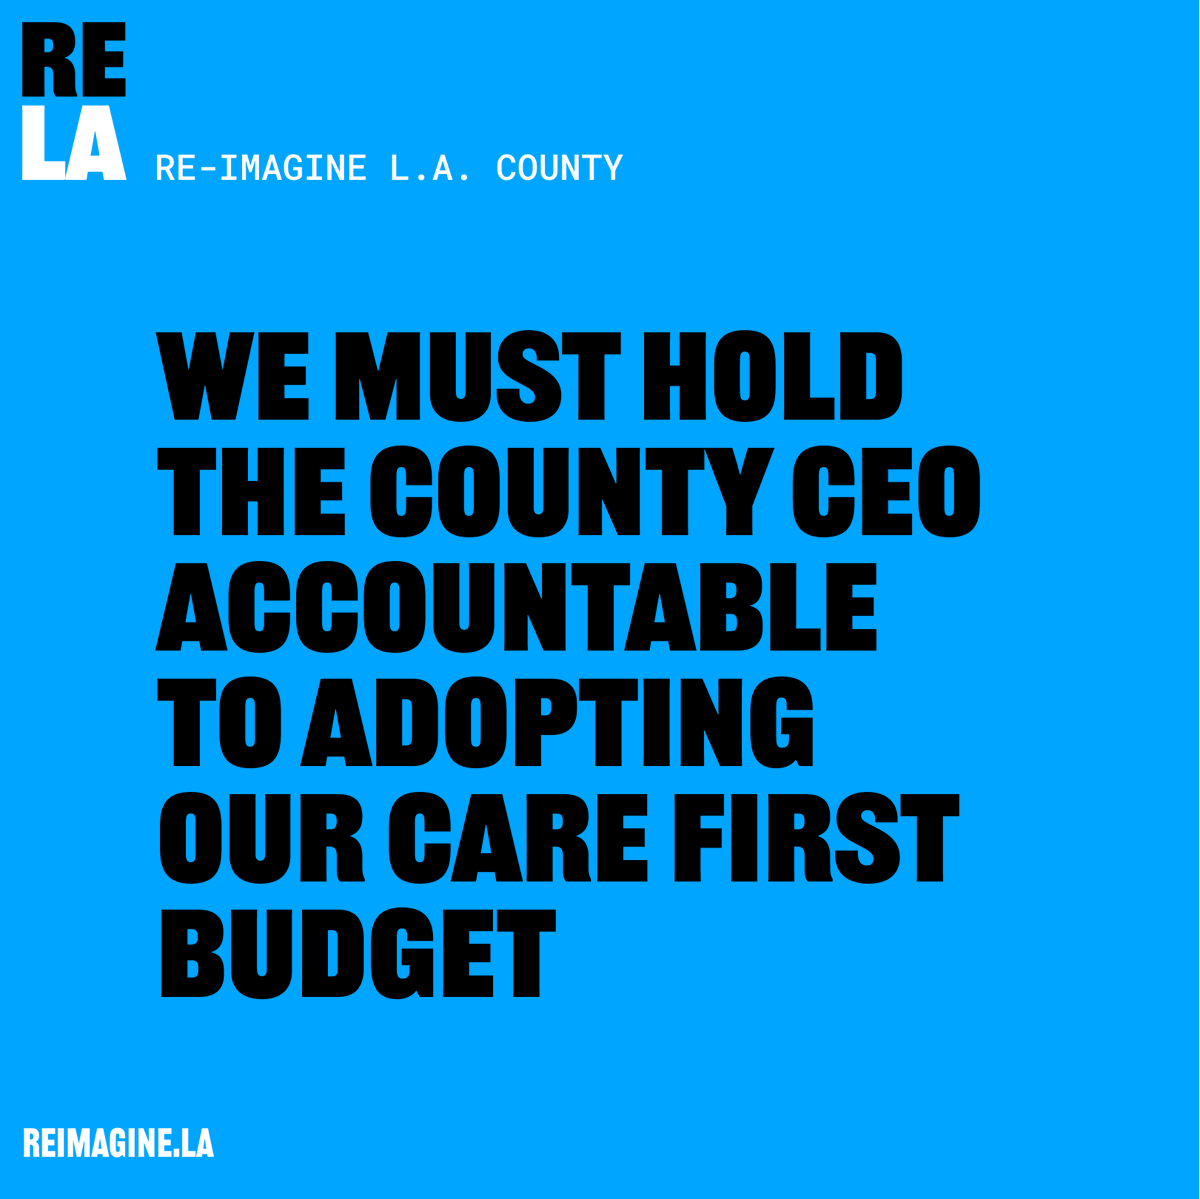 @LACountyCEO proposed giving the Sheriff & Probation department $4.5 BILLION combined for the next fiscal year 🤯

It’s time @LACountyBOS make good on their promise & adopt a #CareFirstBudget that reflects the needs & values of the community!

#FullyFundCareFirst #CloseMCJ